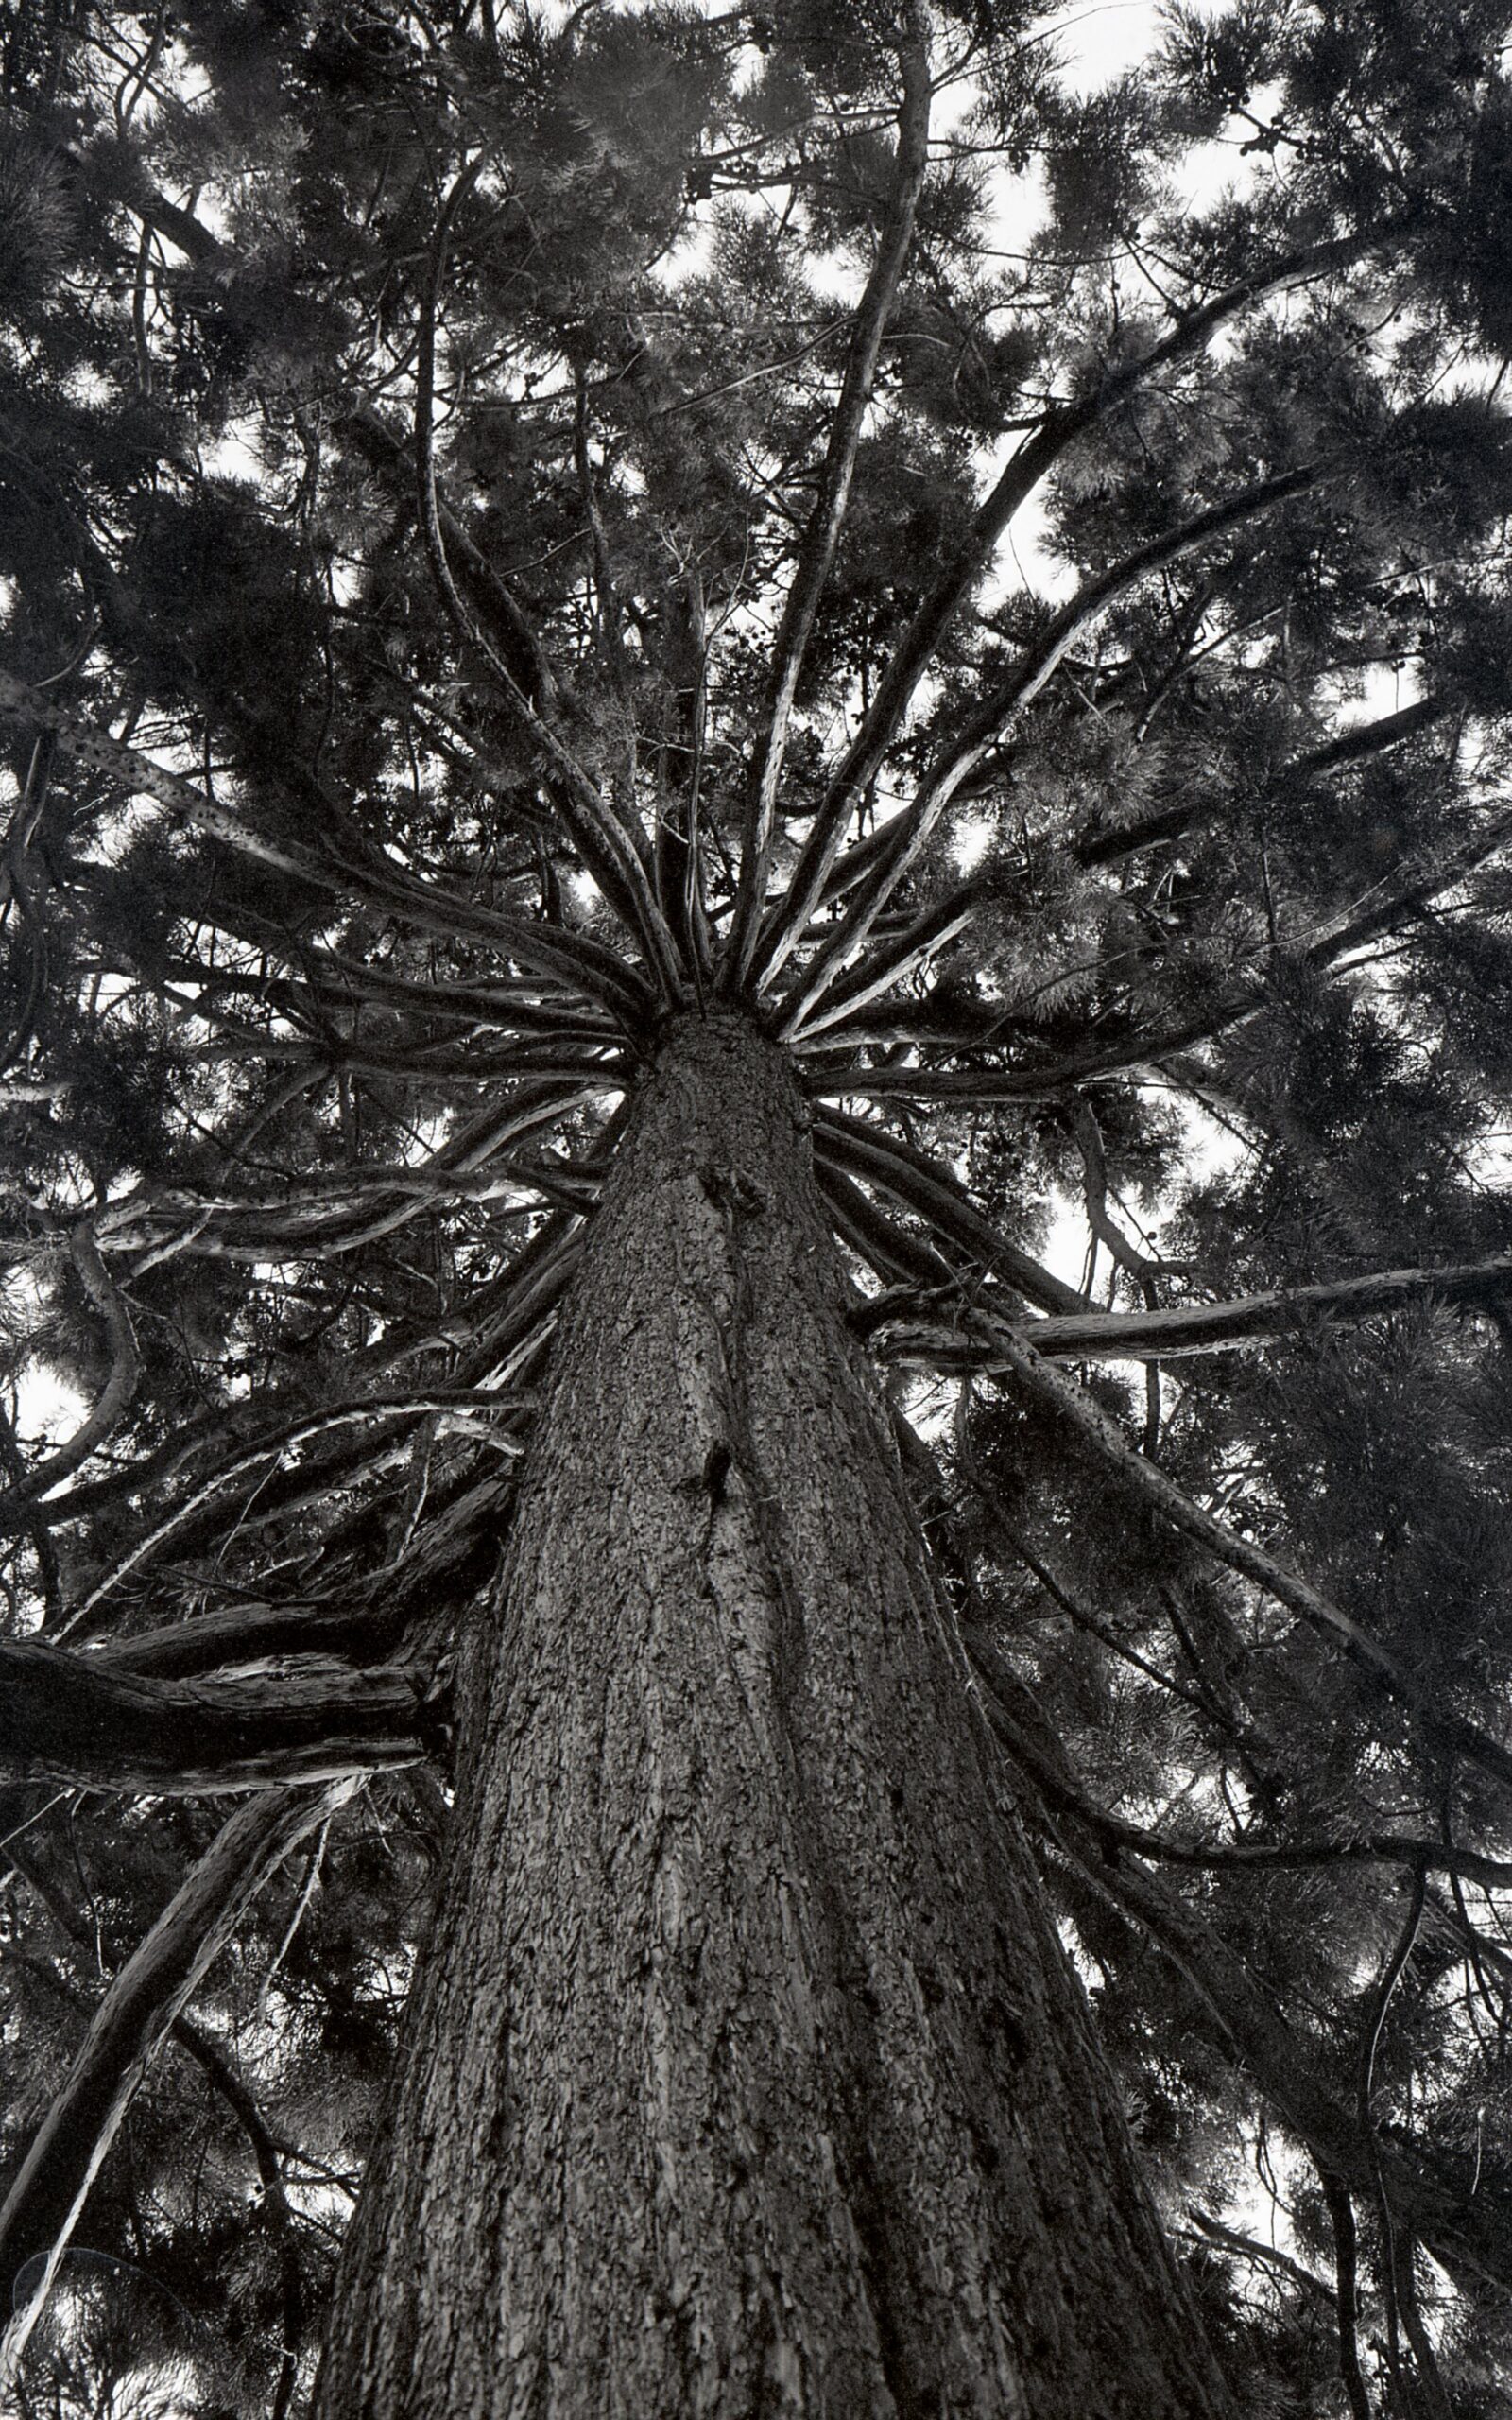 @henry_balen Replying to @ILFORDPhoto Favourite tree in the local park on Ilford Ortho. EI80, developed in Perceptol stock solution. Taken through a 40mm Summicron. #35mmortho #ilfordphoto #fridayfavourites